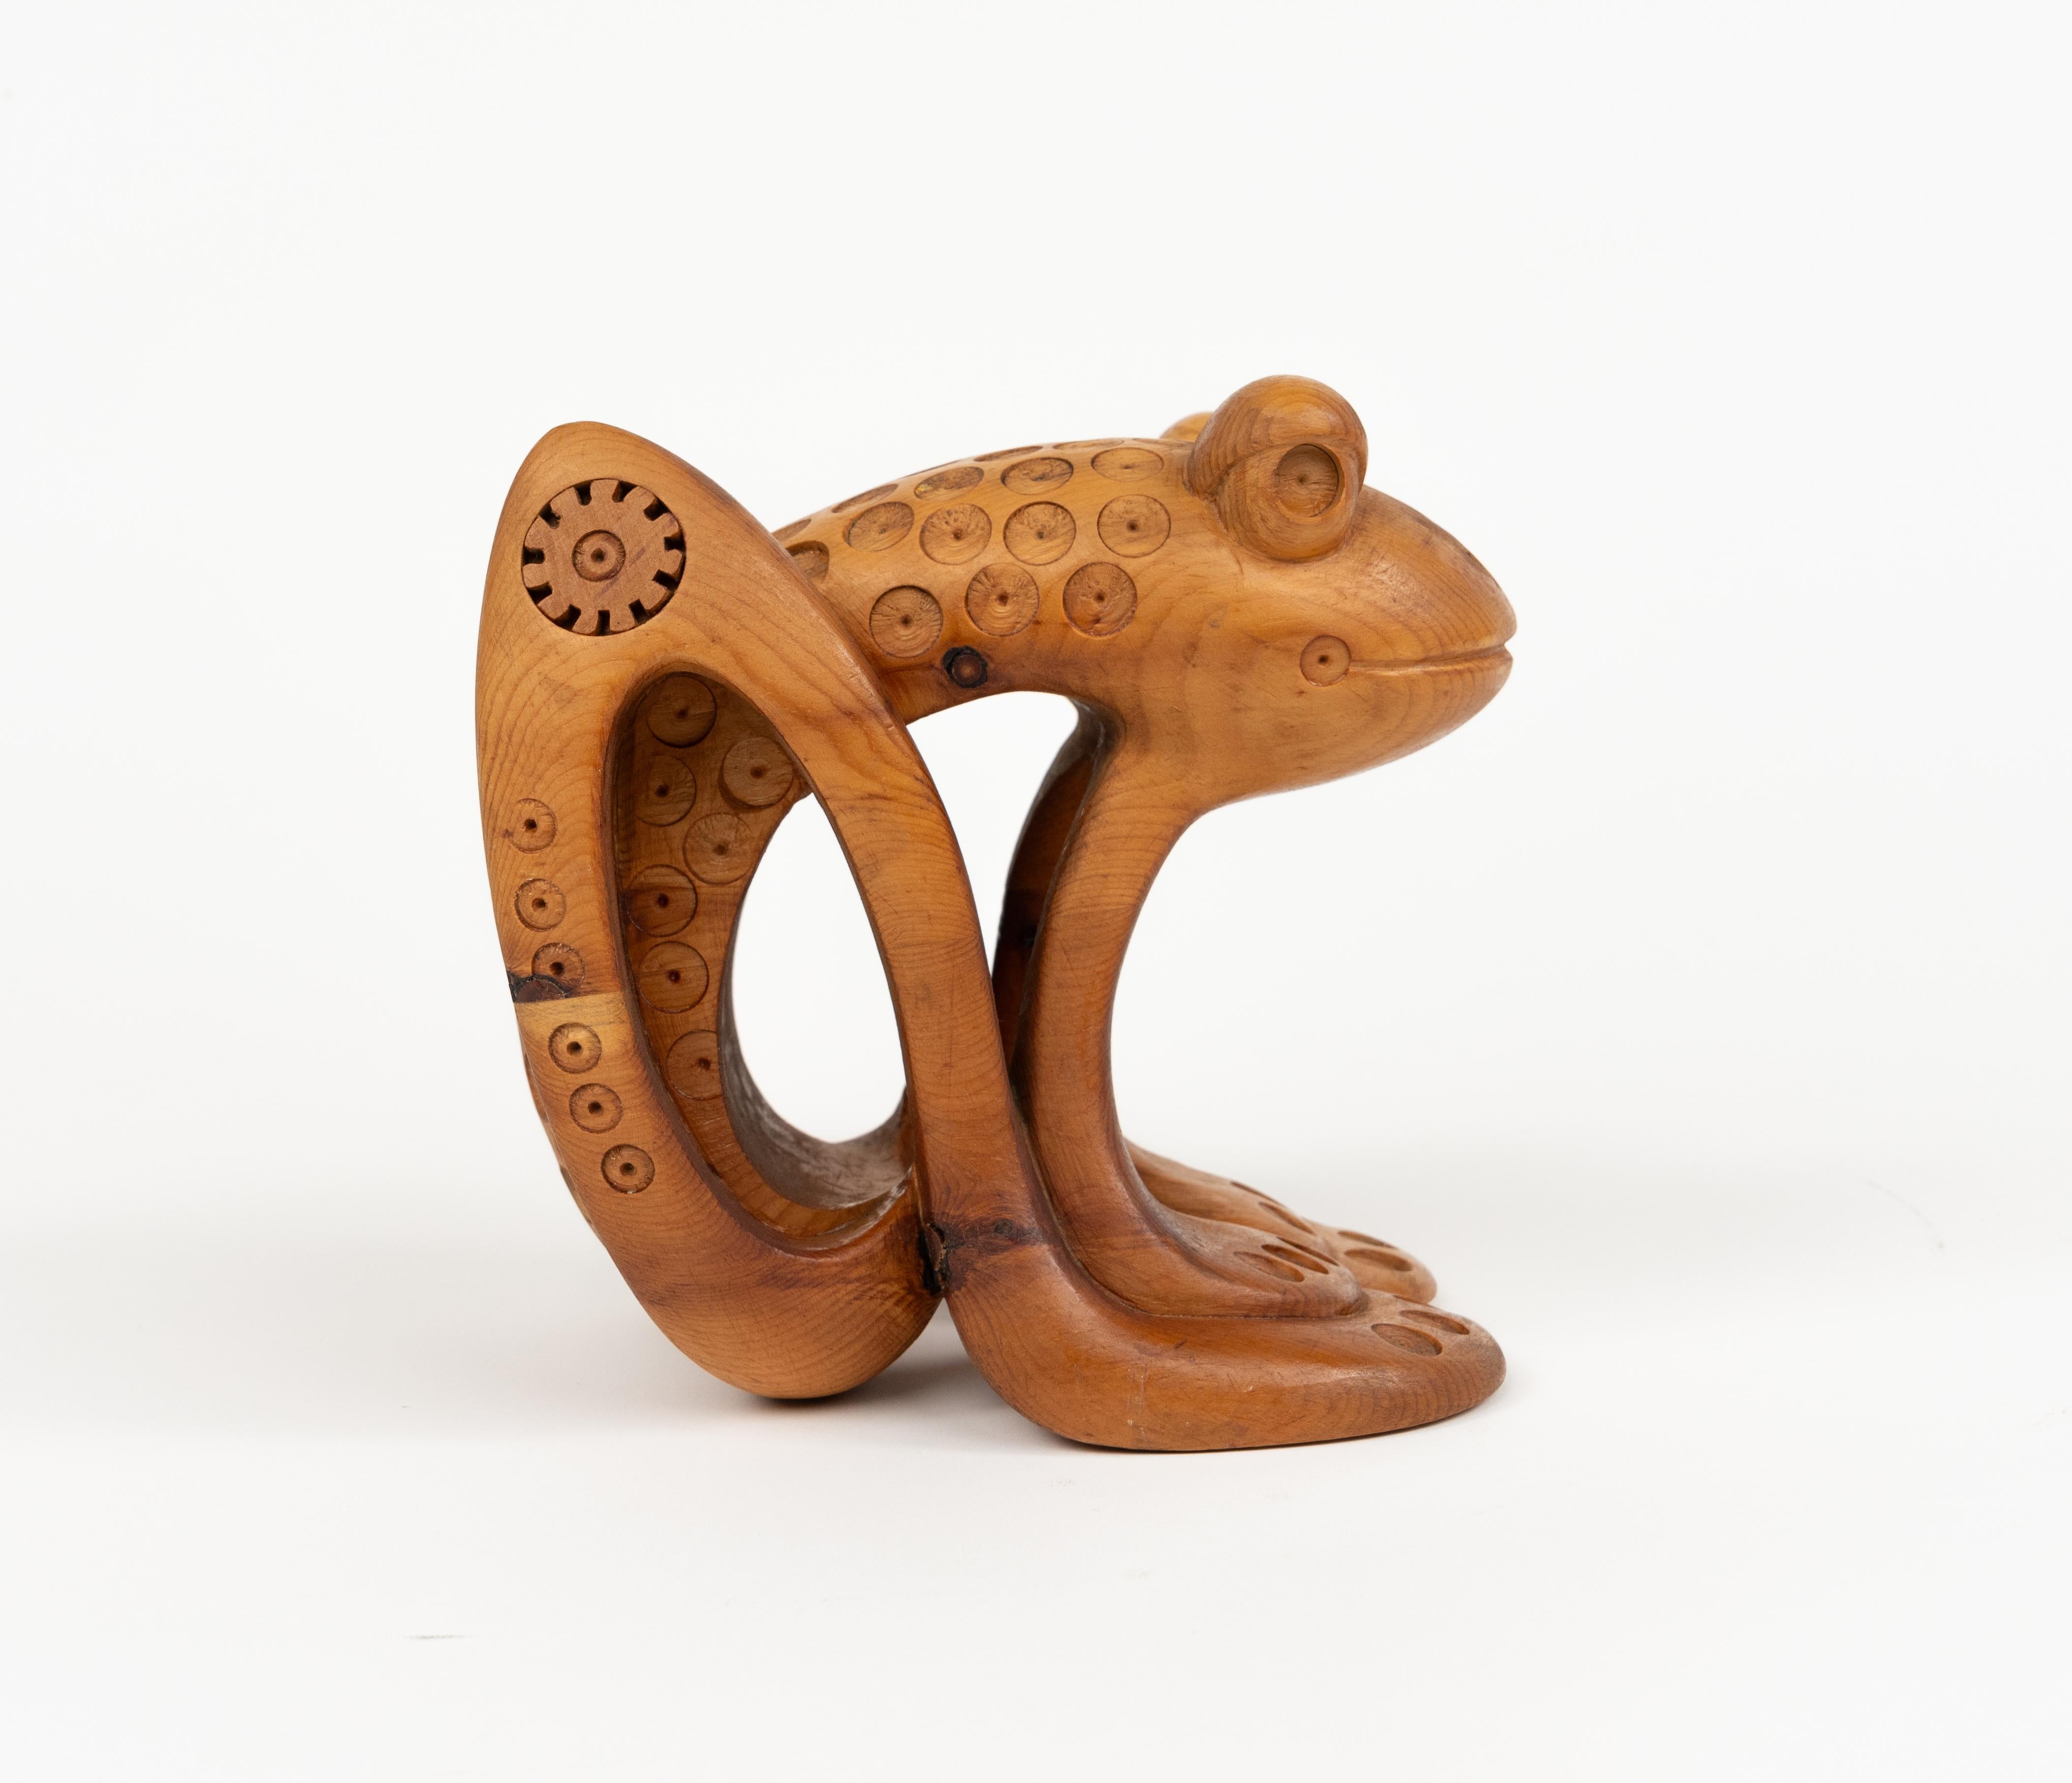 Pine Wood Decorative Sculpture Shape Frog by Ferdinando Codognotto, Italy 2001 For Sale 6